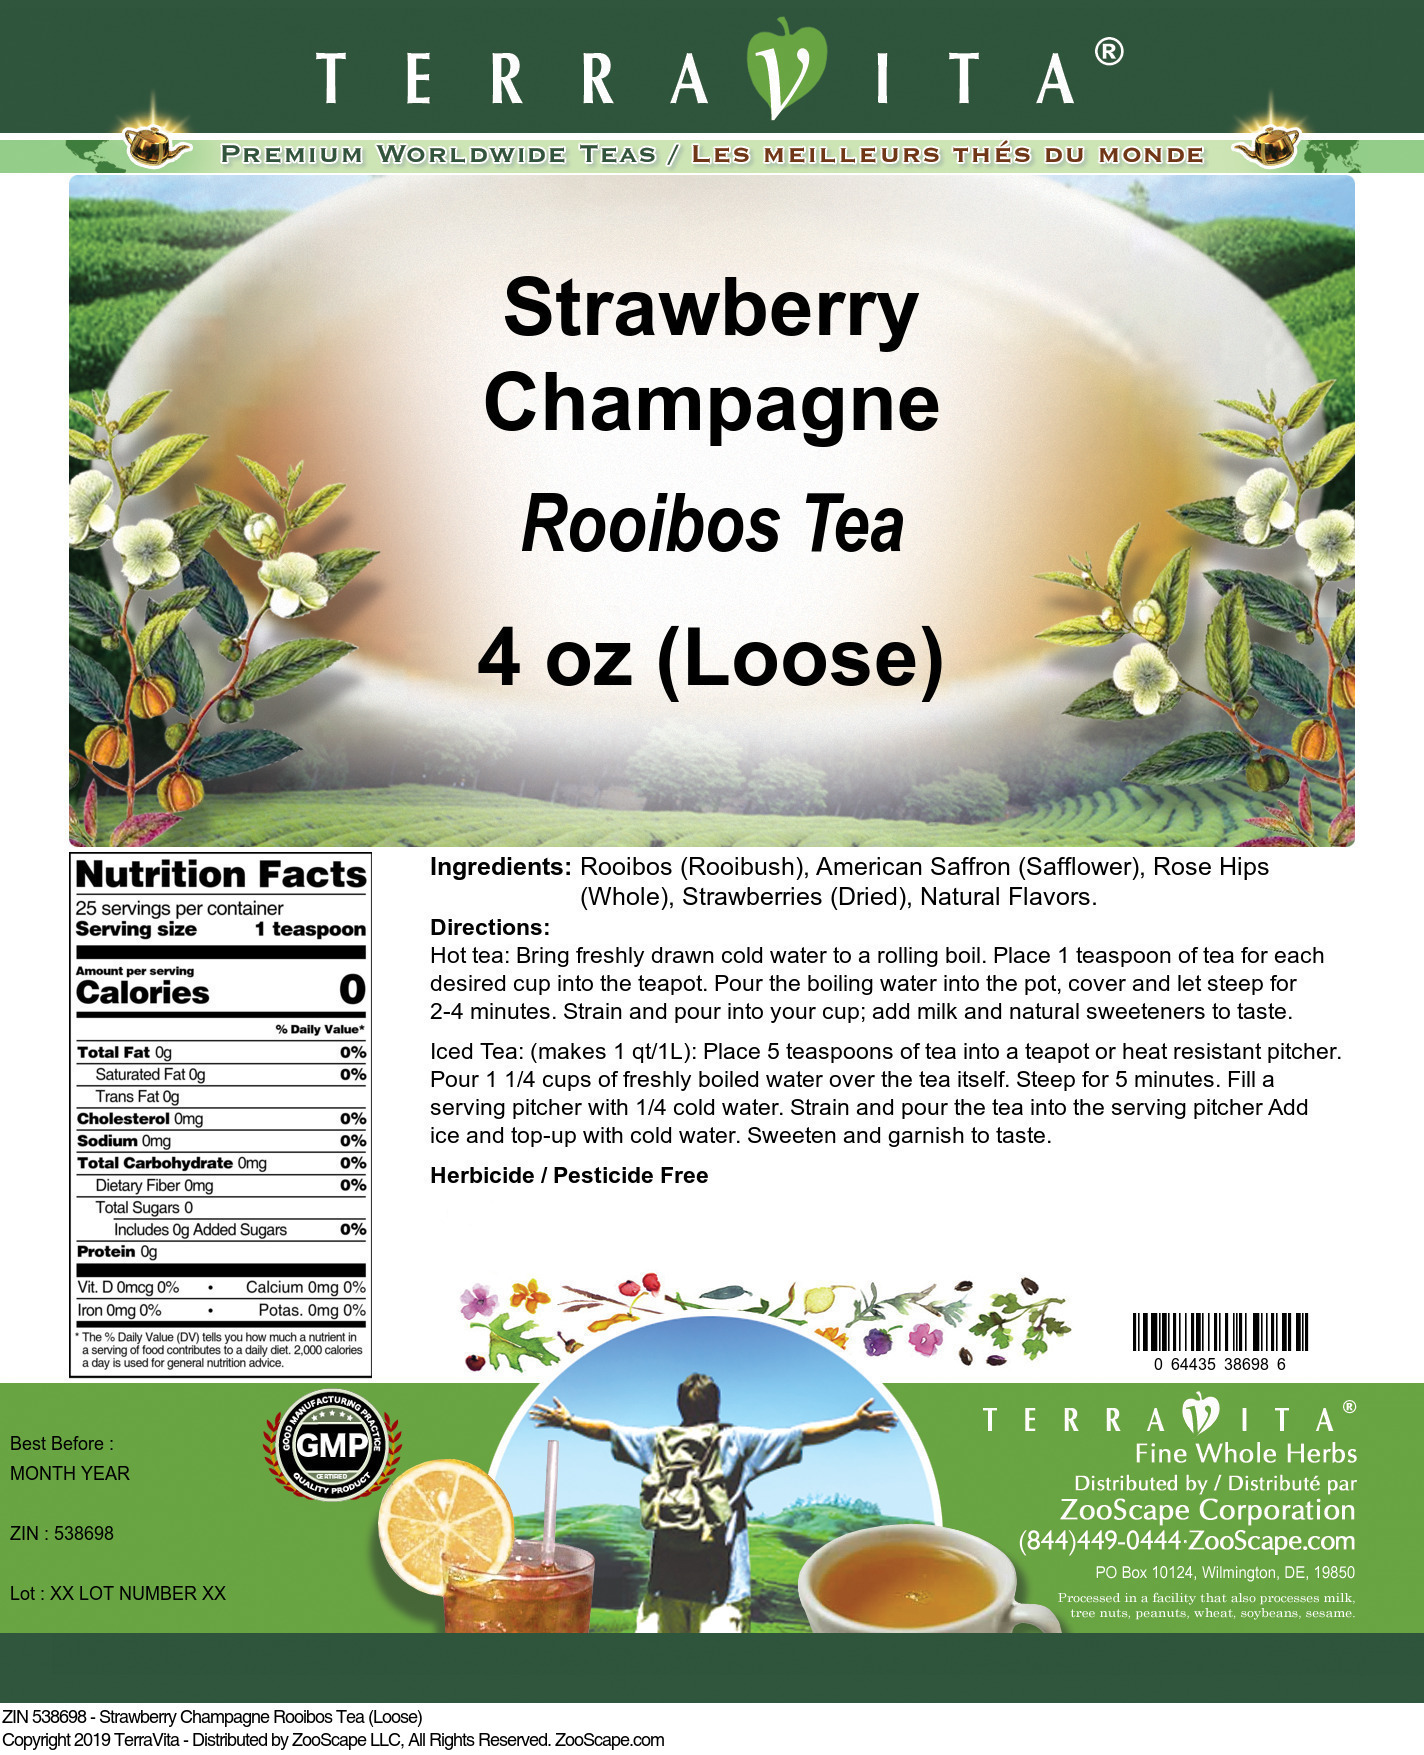 Strawberry Champagne Rooibos Tea (Loose) - Label